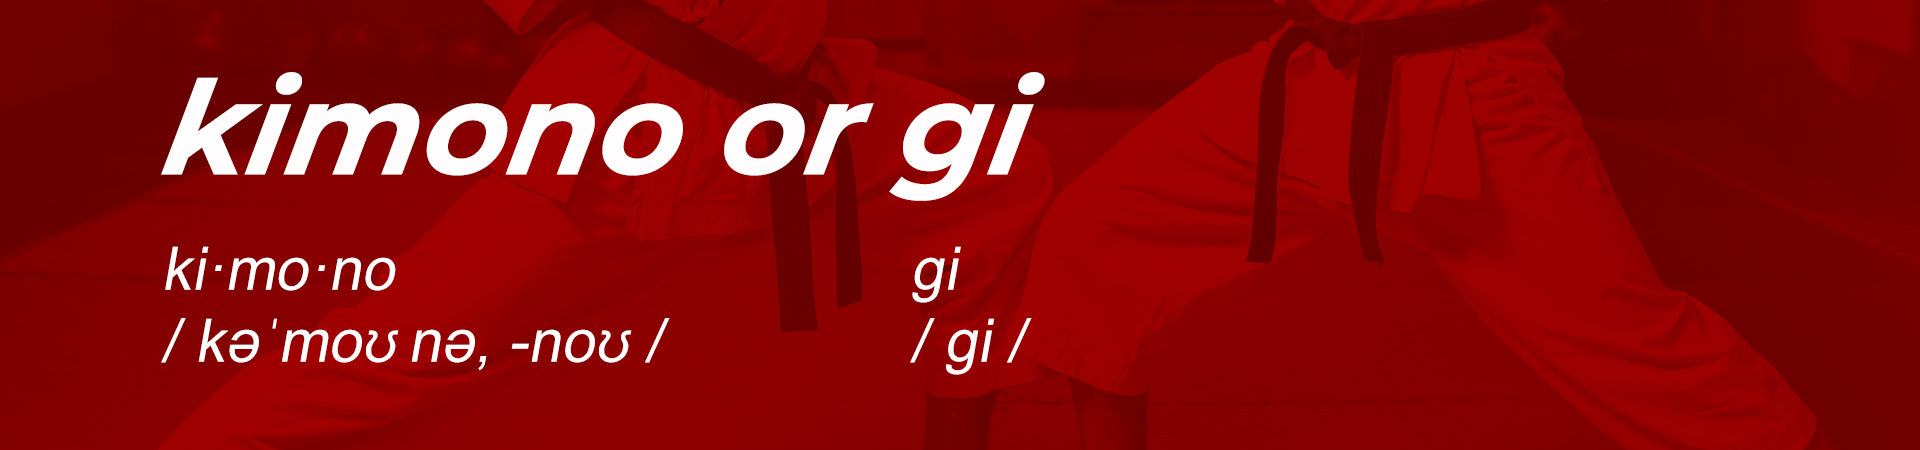 Gi meaning